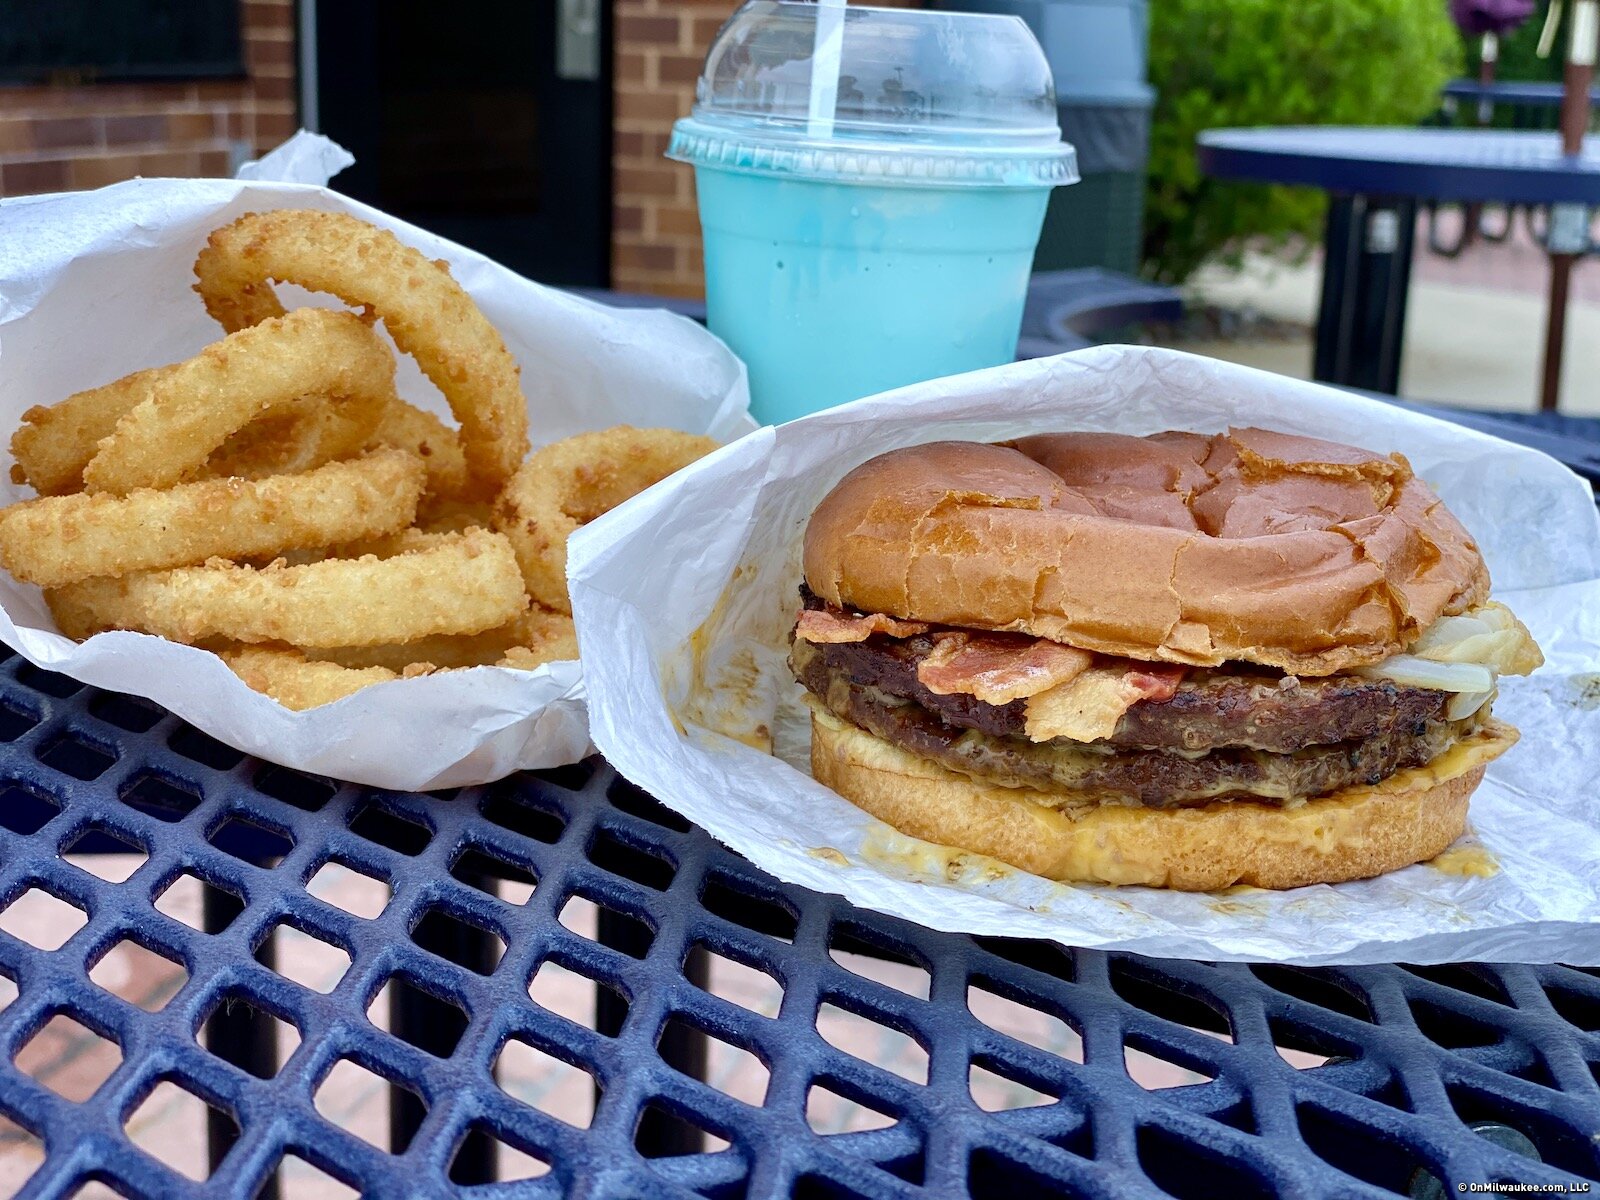 https://onmilwaukee.com/images/articles/on/on-the-burger-trail-bubbas-frozen-custar/on-the-burger-trail-bubbas-frozen-custar_fullsize_story1.jpg